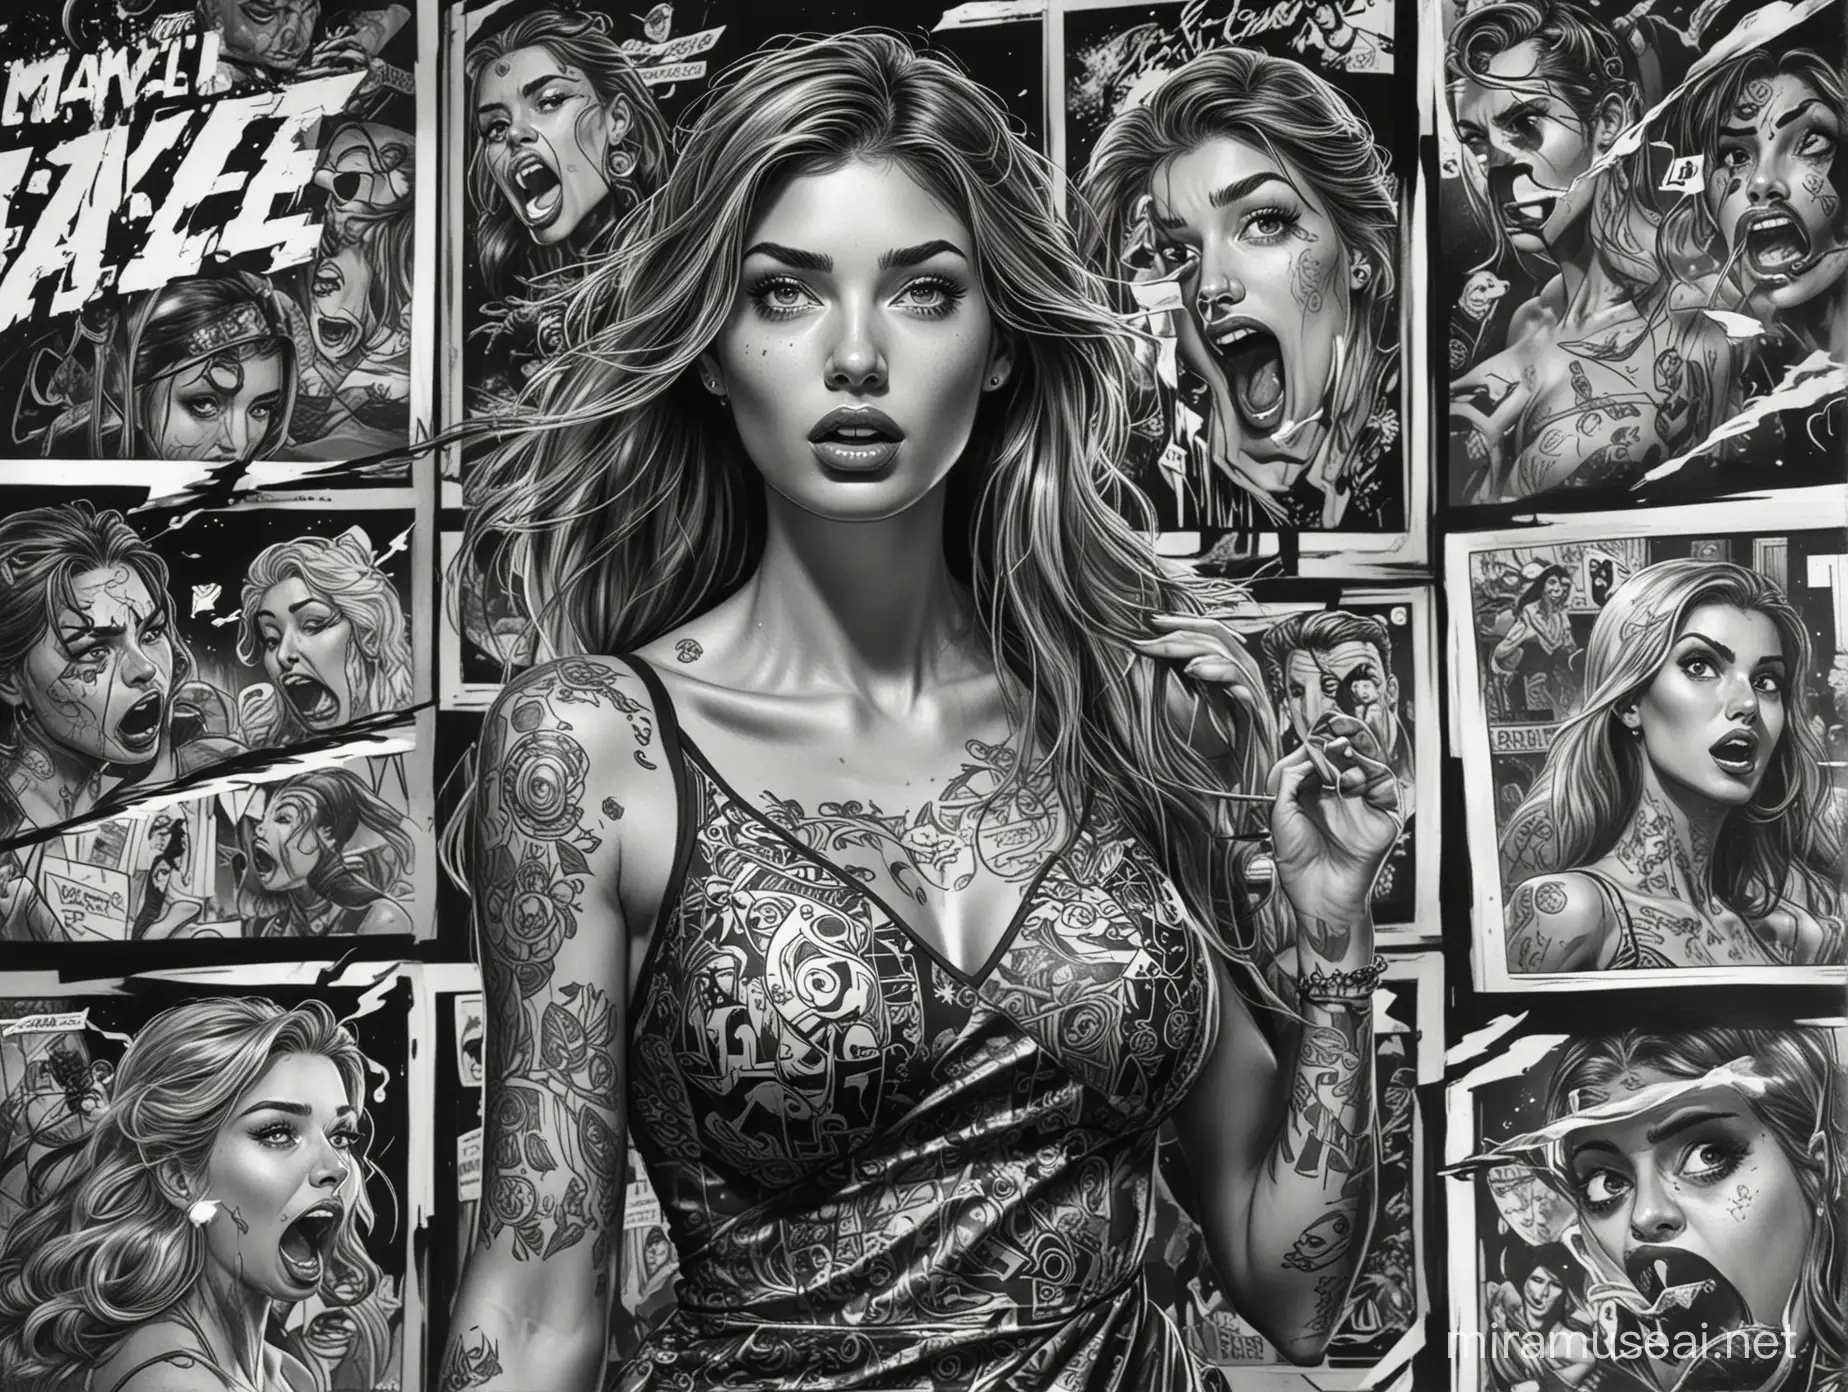 90's comic style, Black and White, Master pencil drawing, Storyboard sheet with many illustrations, Portraits of an astonished woman, Camila Morrone, Covered in colorful tattoos, Black tiny short dress, Running. Night time. No Background. Zoom out view. Marvel comic style. High resolution.  High contrast.